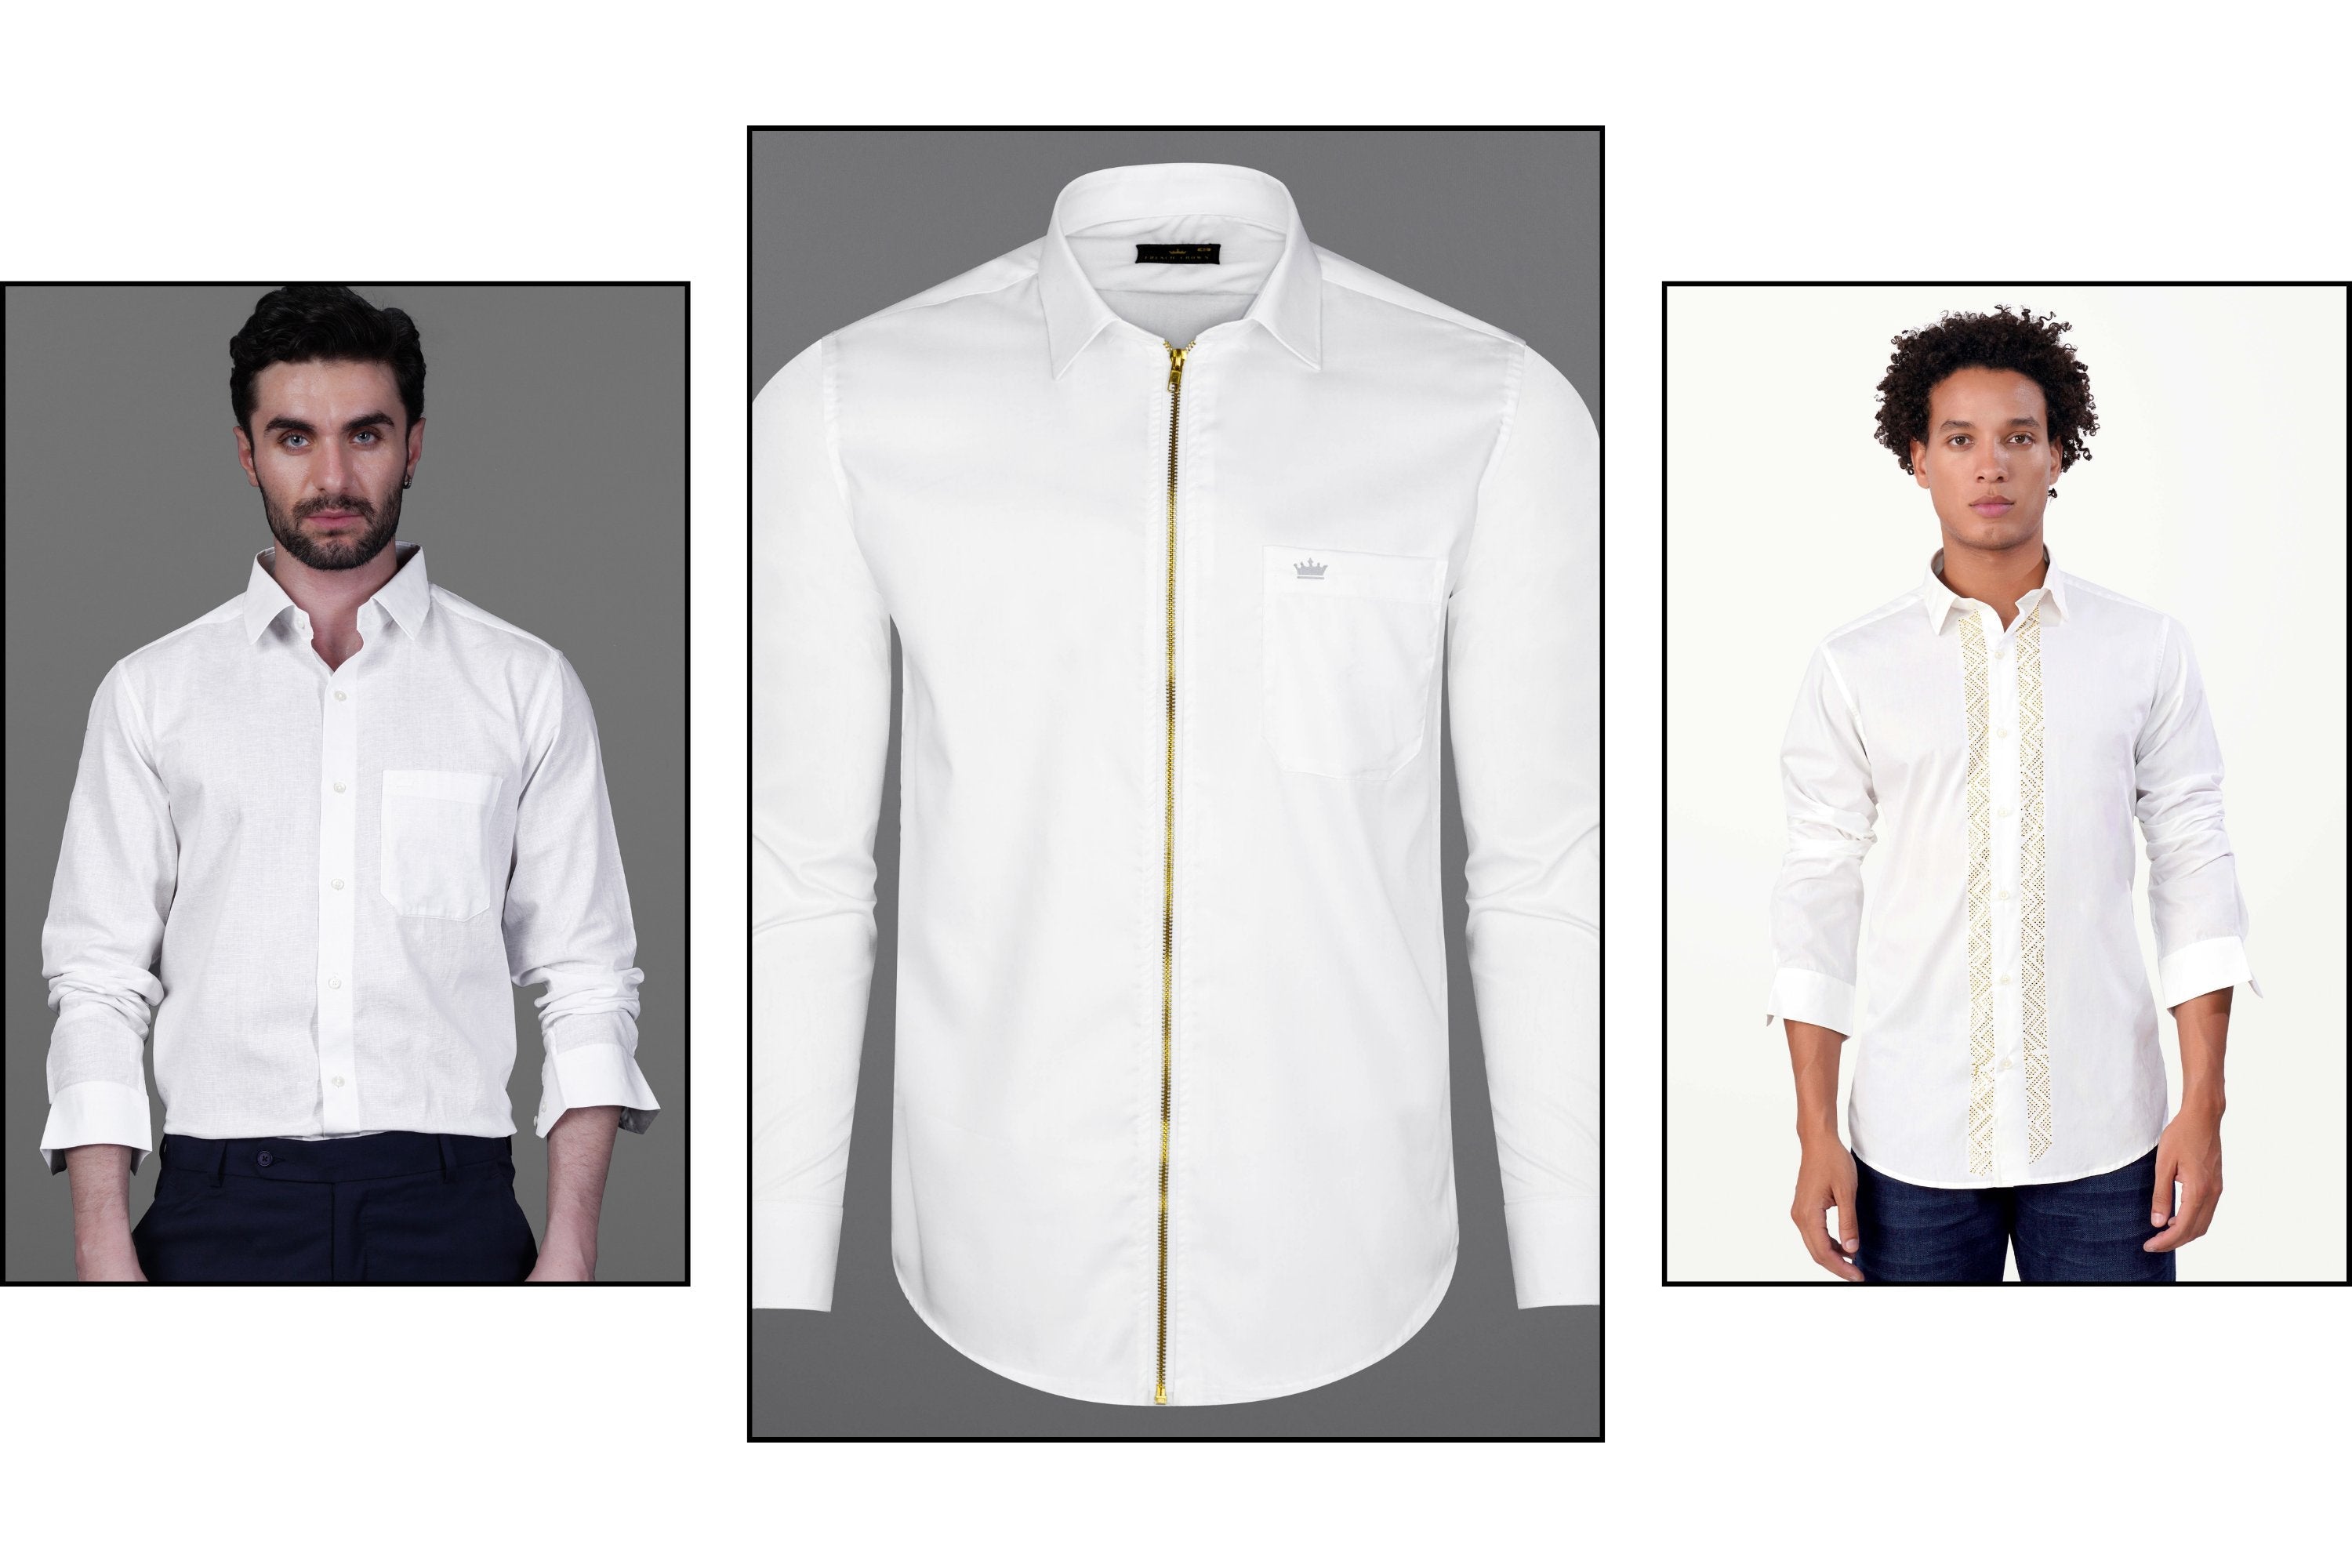 White Shirts For Men in Formal, Casual, and Printed Styles